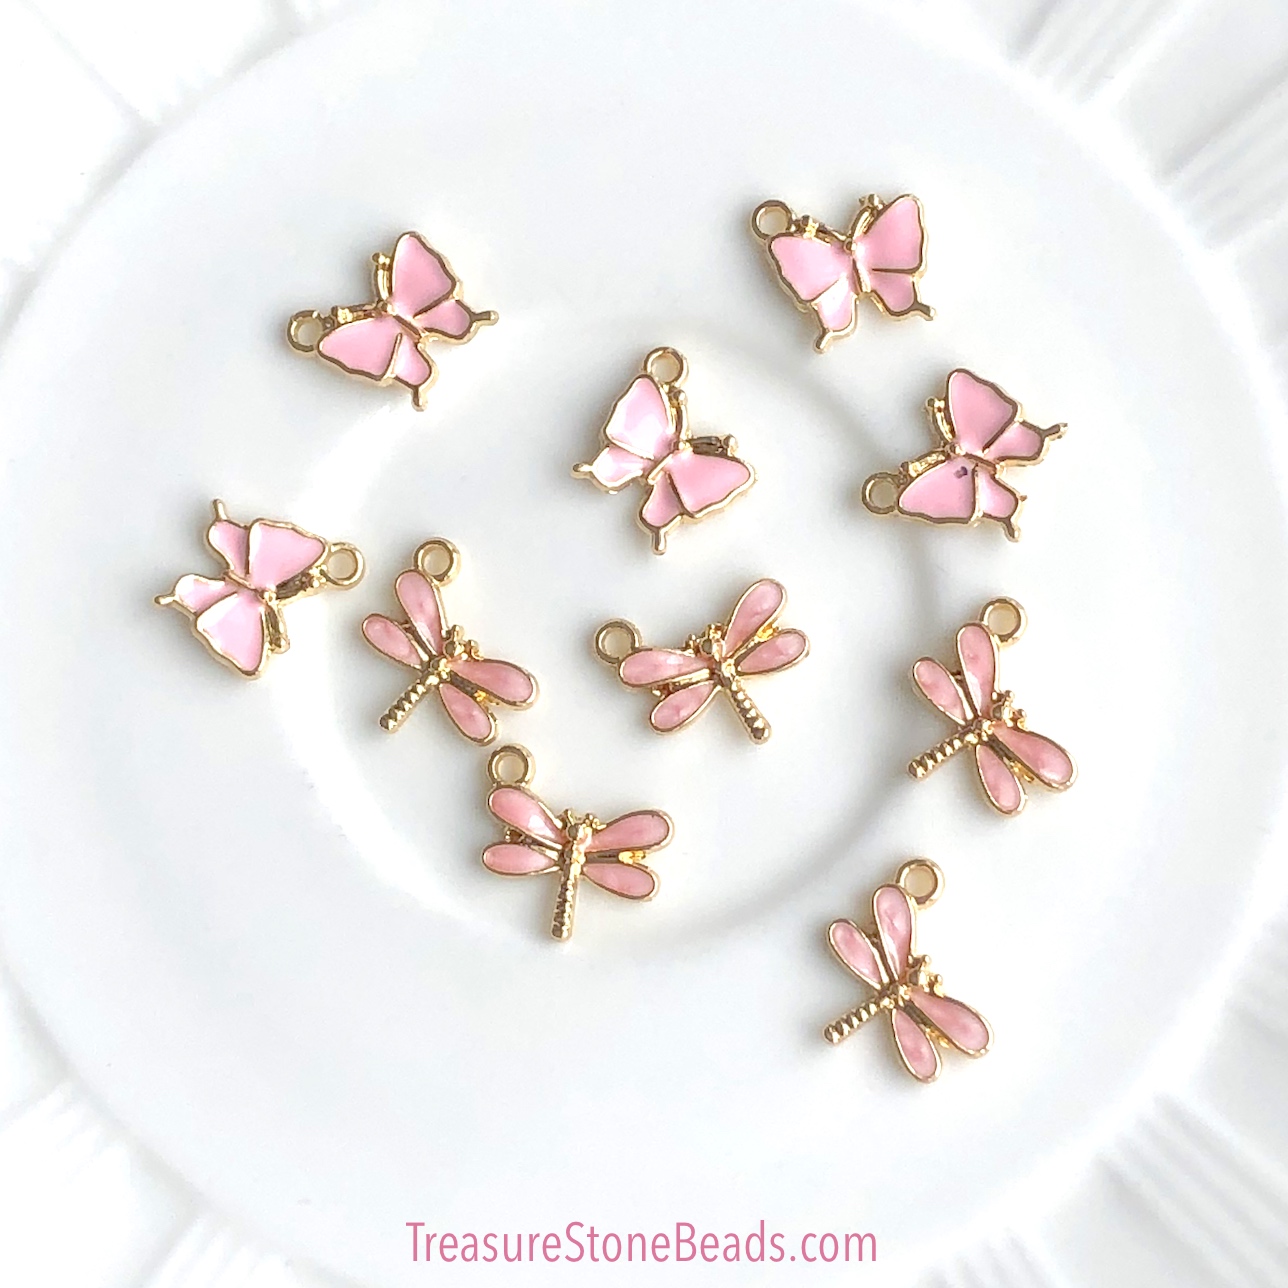 Charm / Pendant, 13x11mm pink butterfly, gold, Enamel. pack of 3